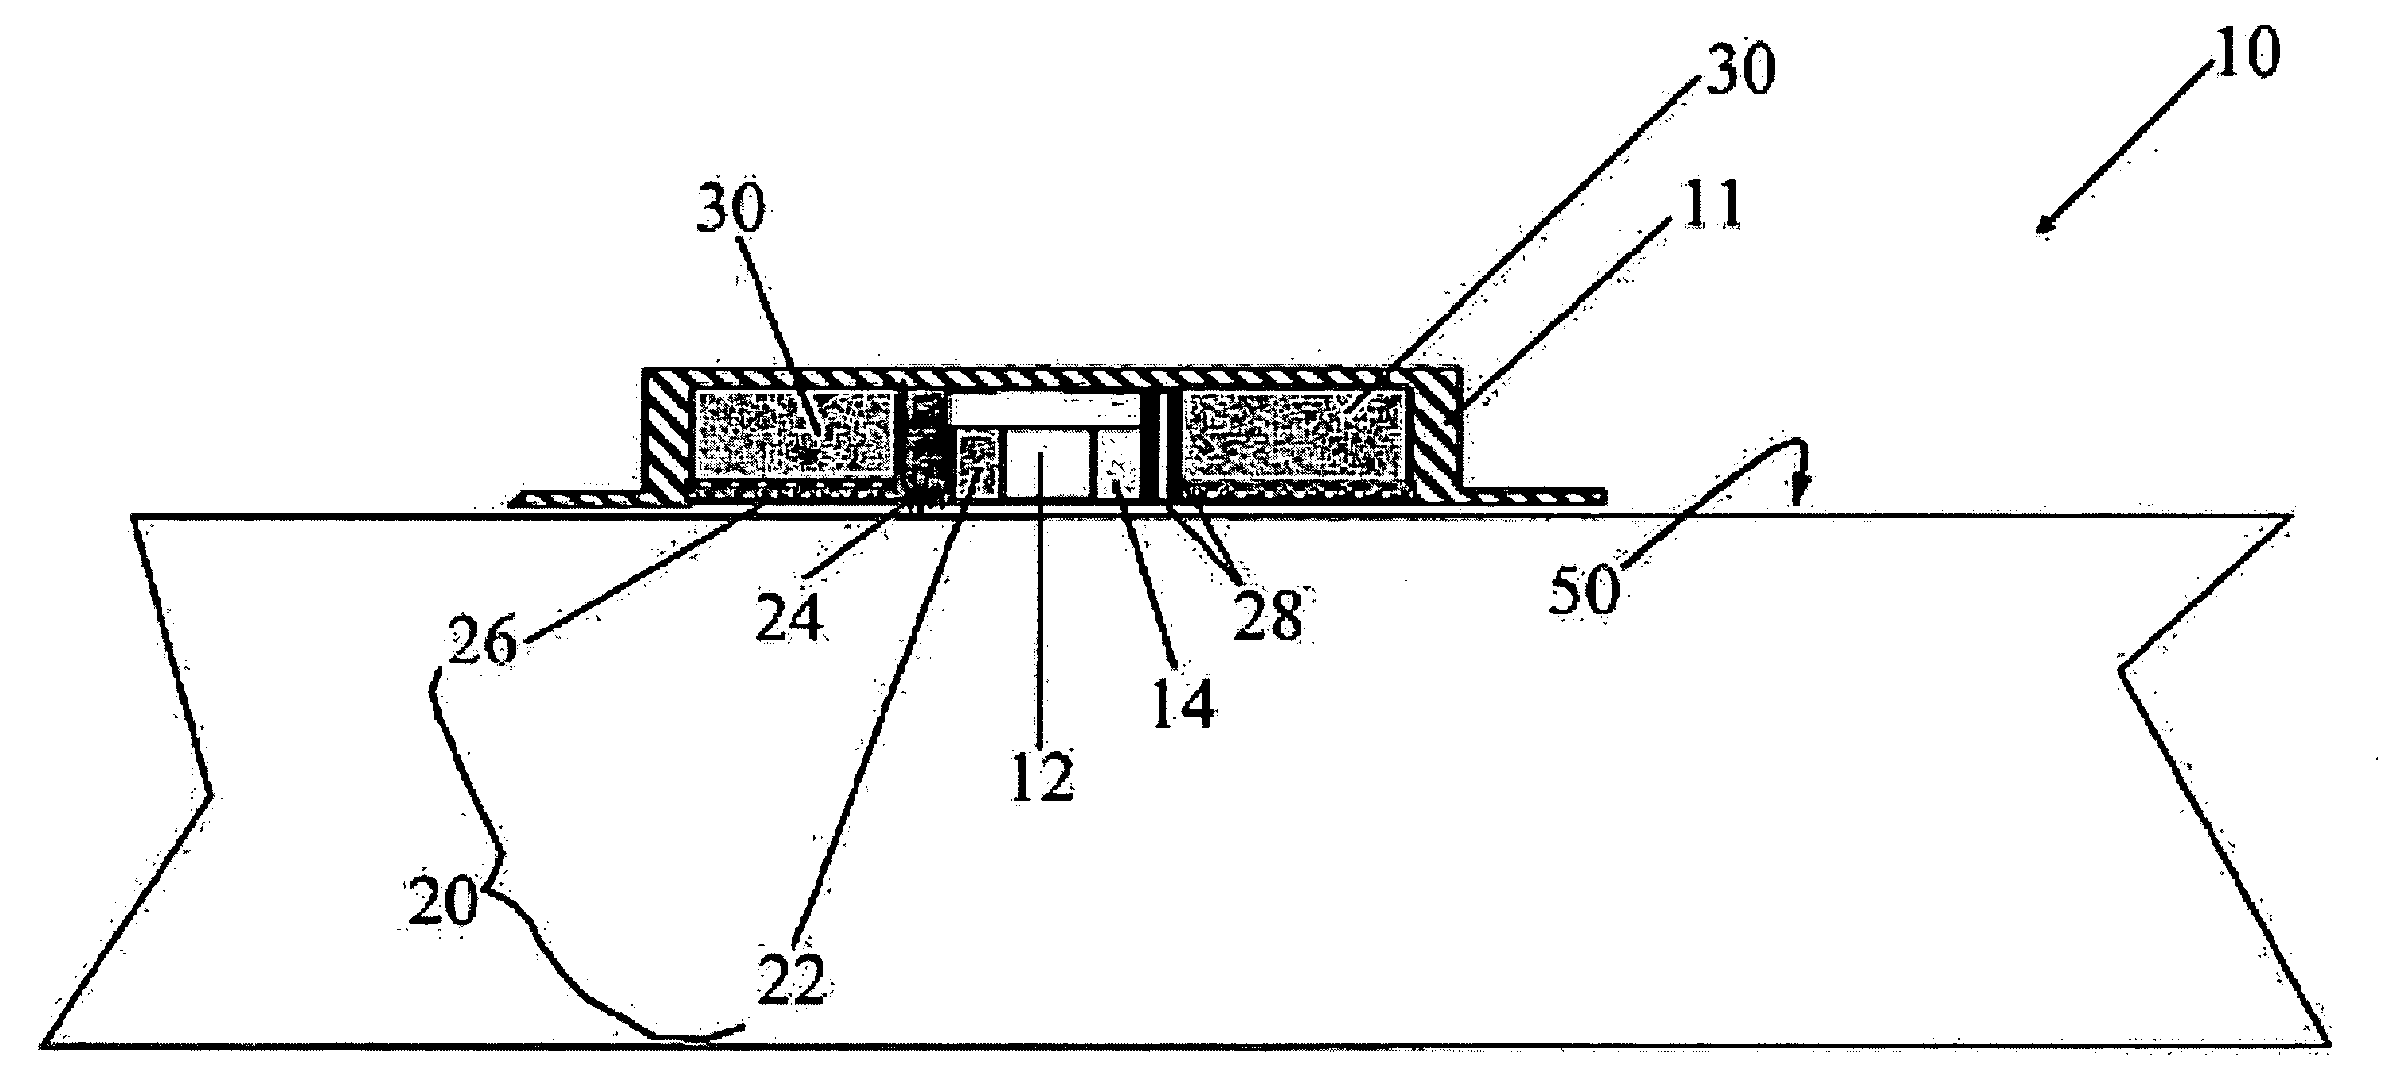 Medical device for delivering drug and/or performing physical therapy